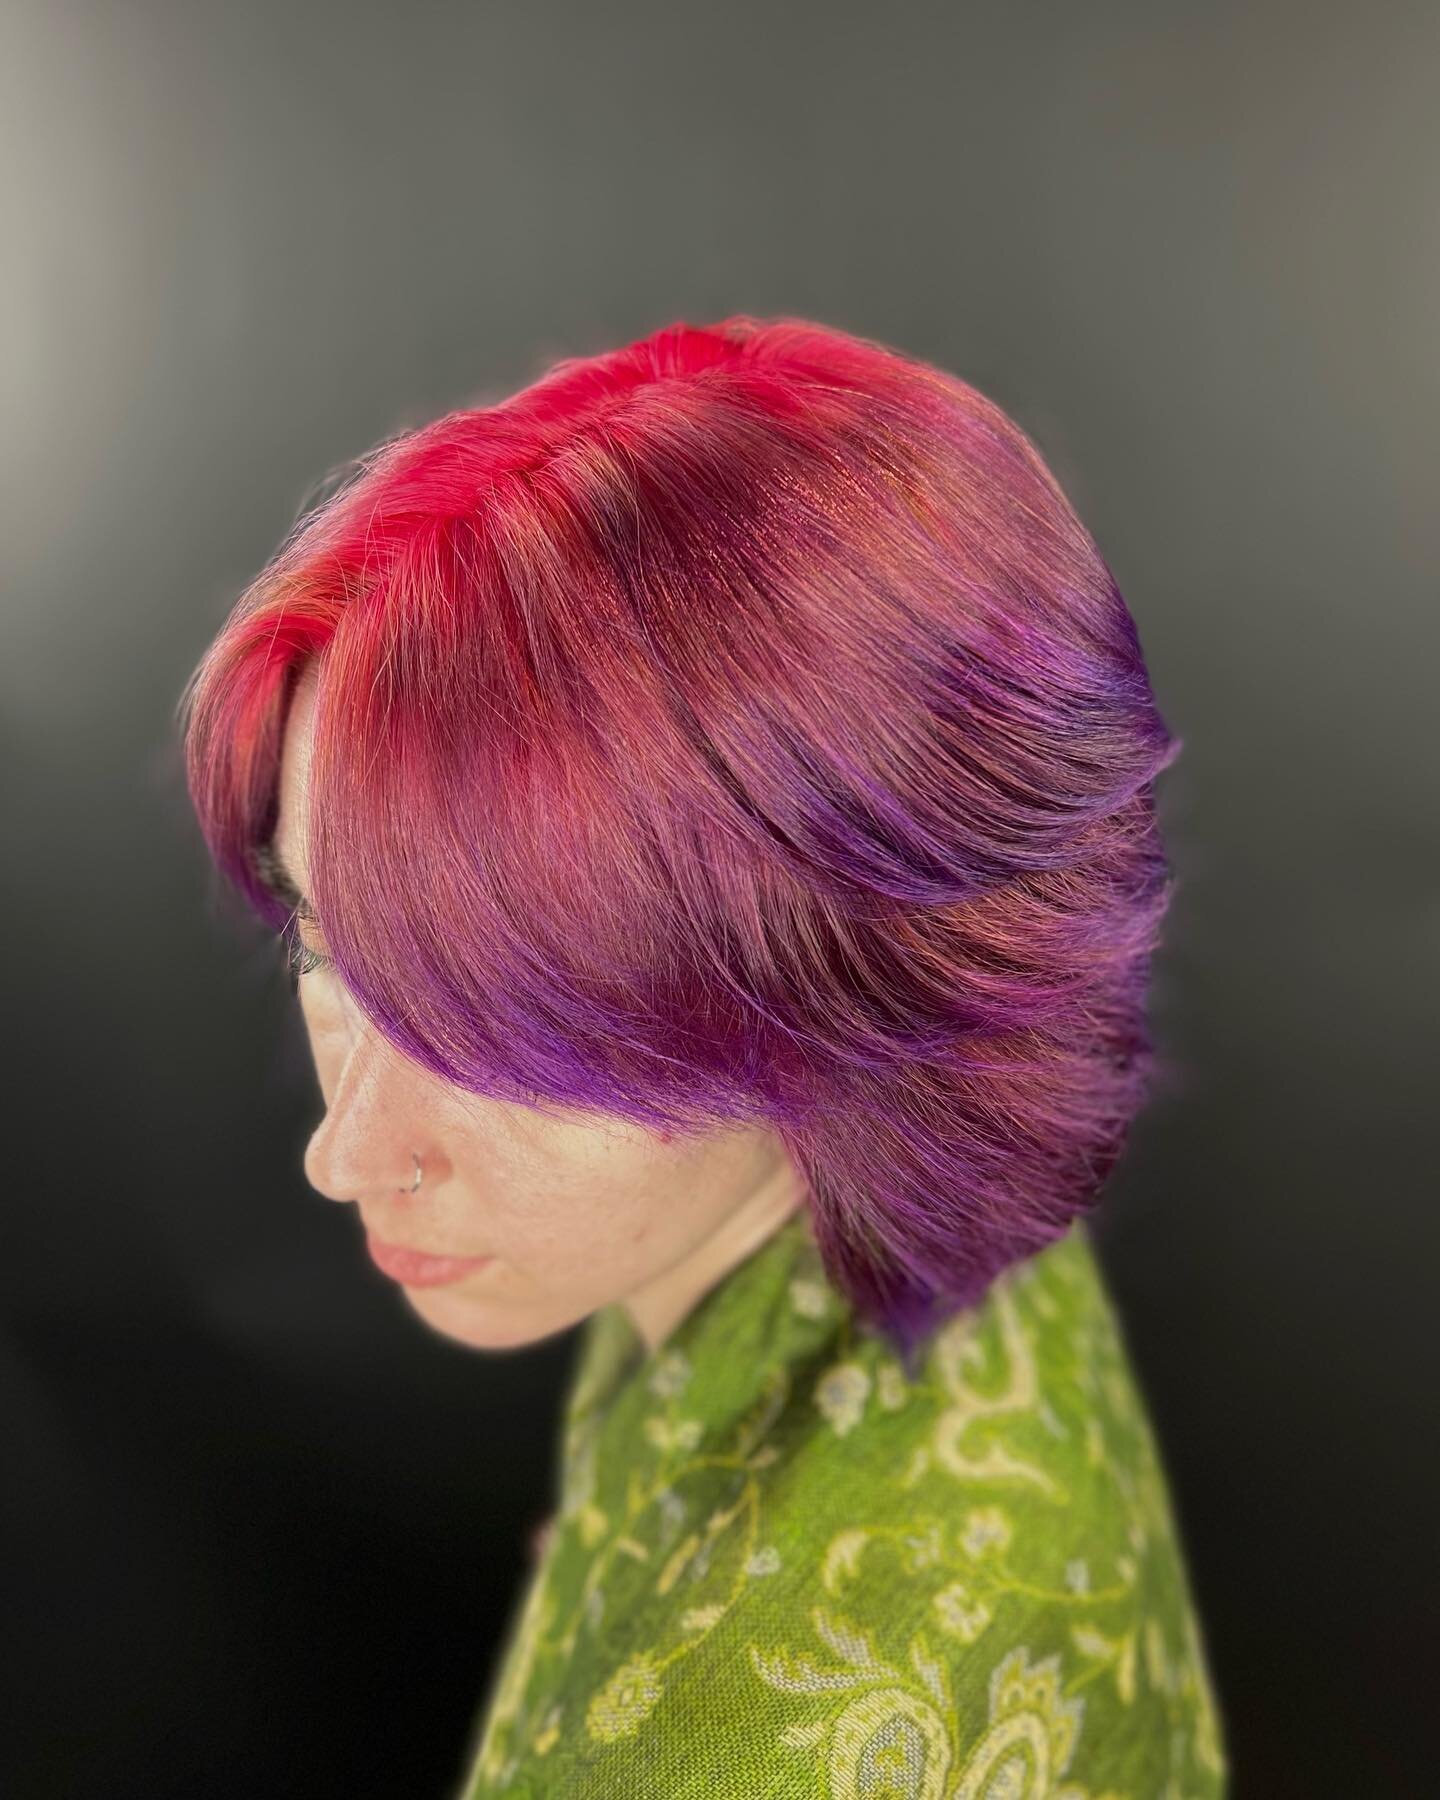 Fun colors for this fun gal 💗💜 

Shout out to my girl Lilly for letting me take full control over her hair! Message me or call 4106366171 to book an appointment with me!

#marylandhairstylist #pulpriot #pulpriothair #wemakeitvivid #redken #linthicu